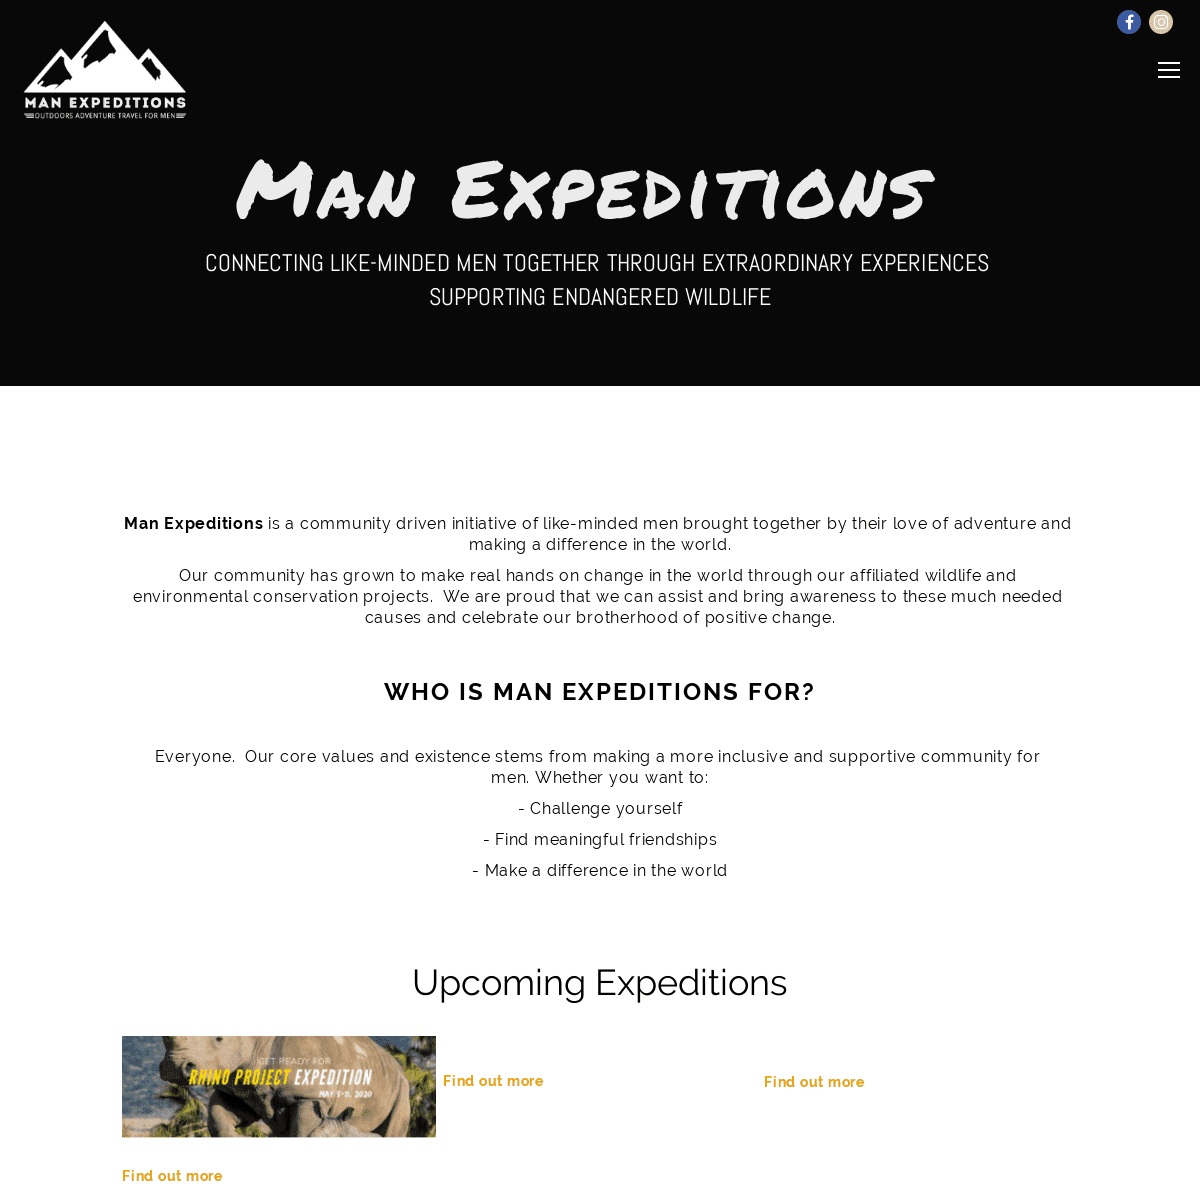 A complete backup of manexpeditions.com